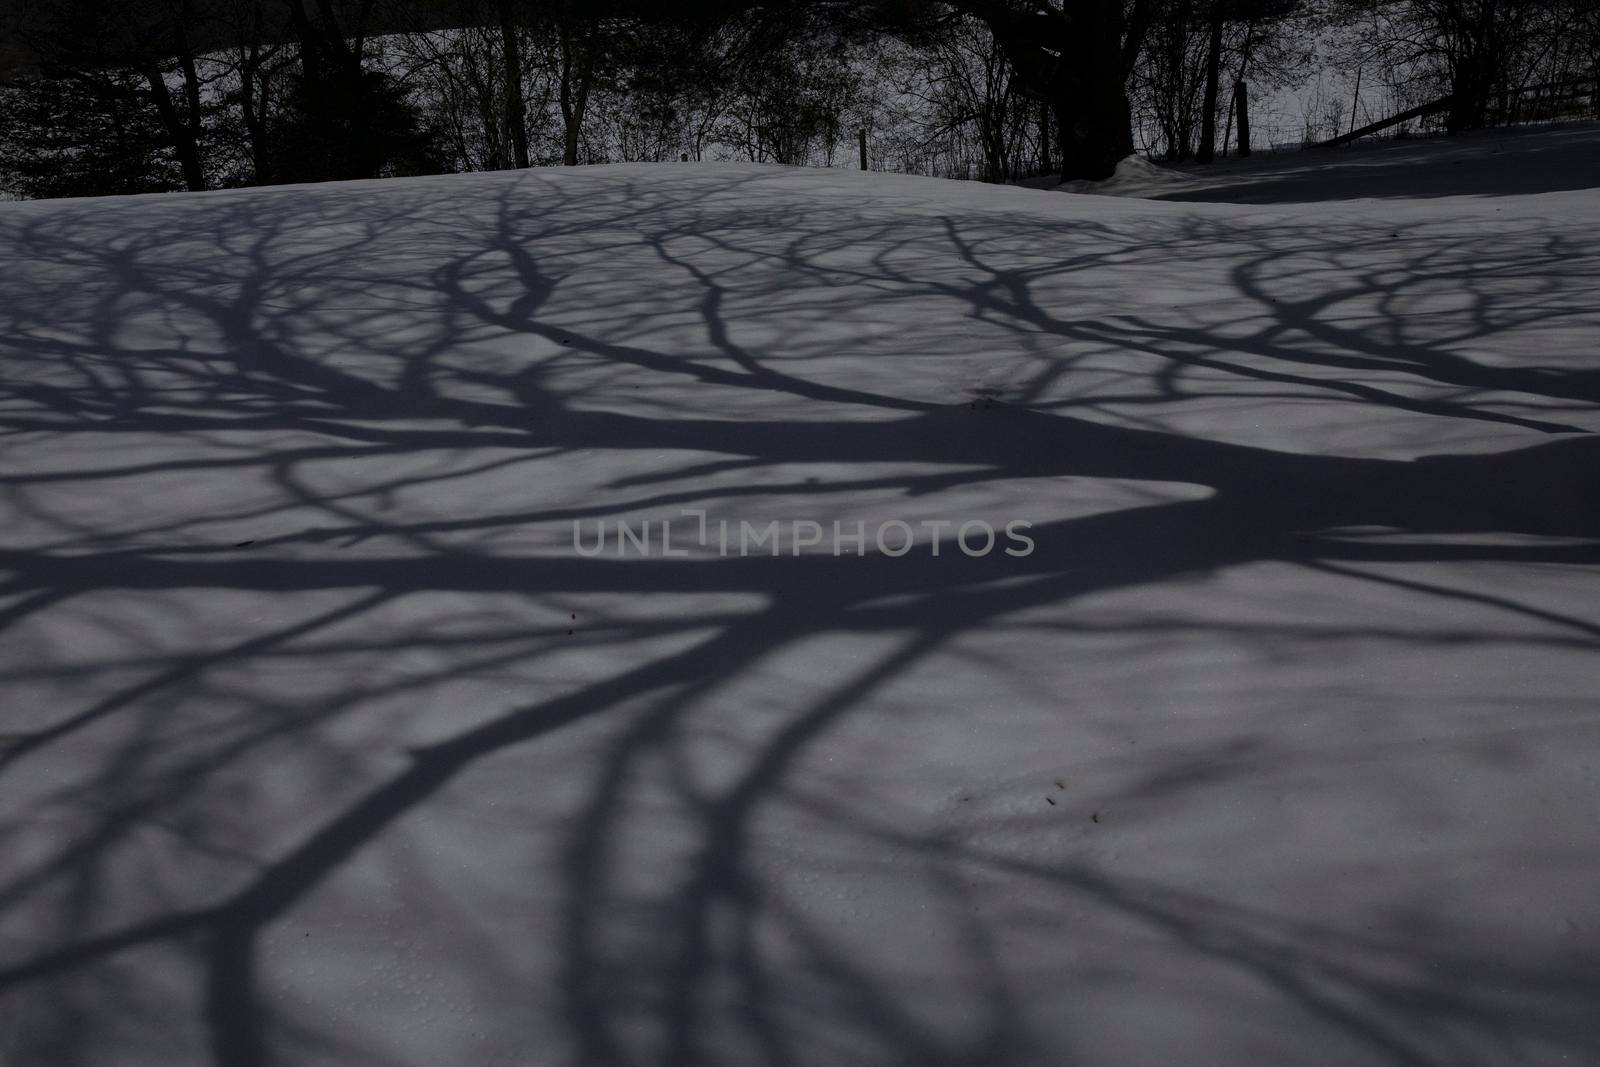 Shadows from the first full moon of 2022 (Wolf Moon) from a cherry tree cast on fresh snow.